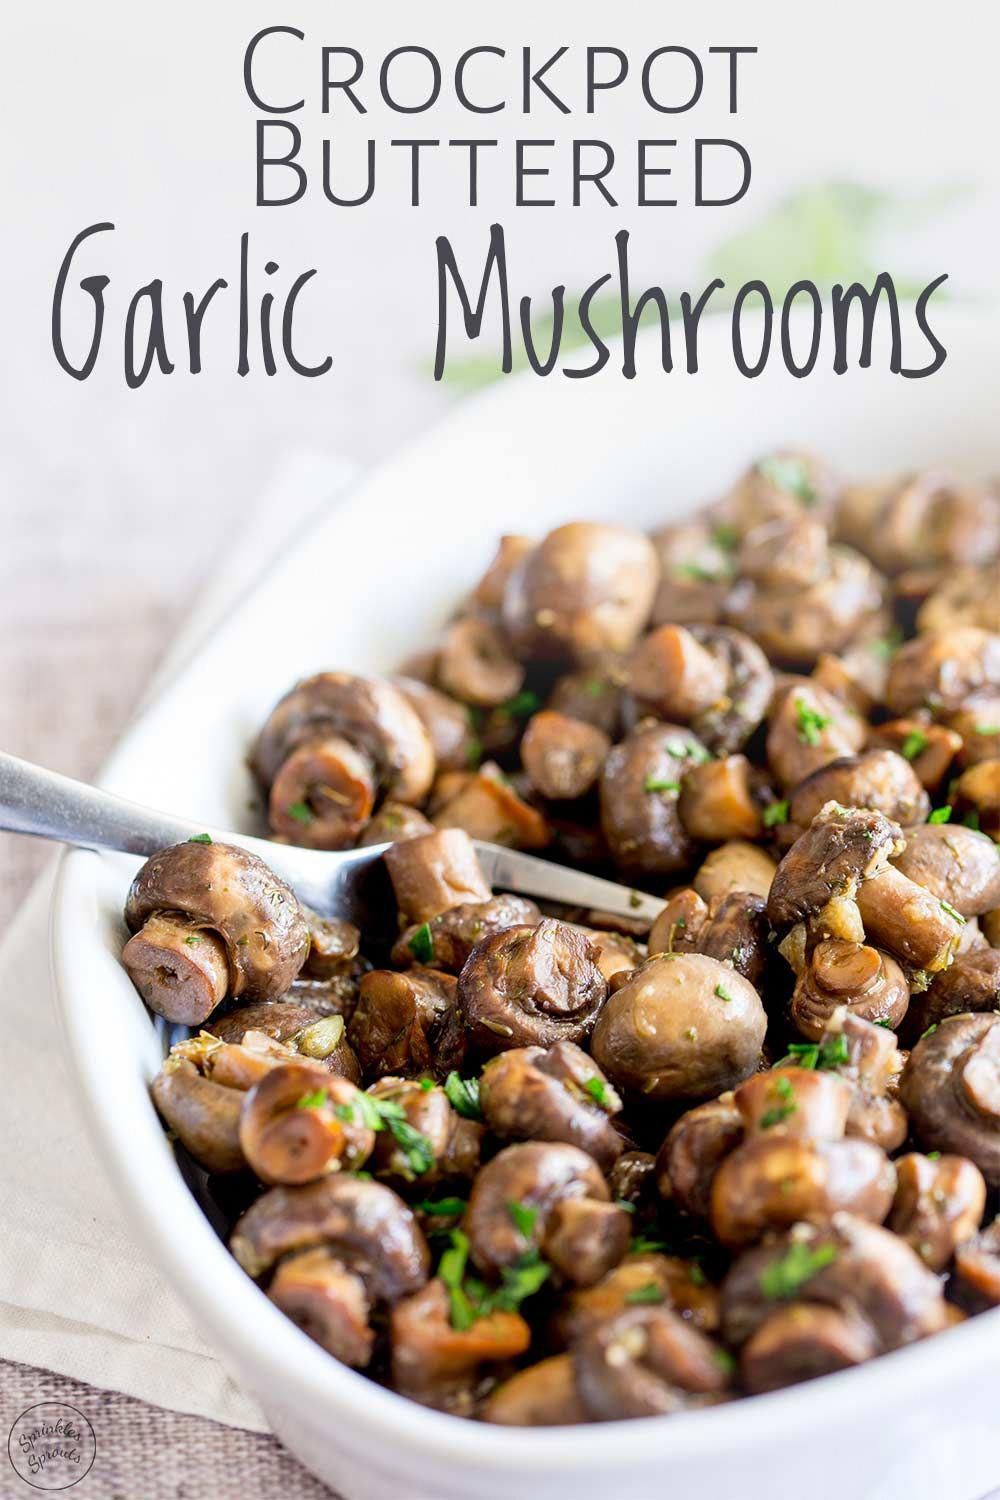 Crockpot Buttered Garlic Mushrooms | Sprinkles and Sprouts -   19 thanksgiving side dishes crockpot ideas